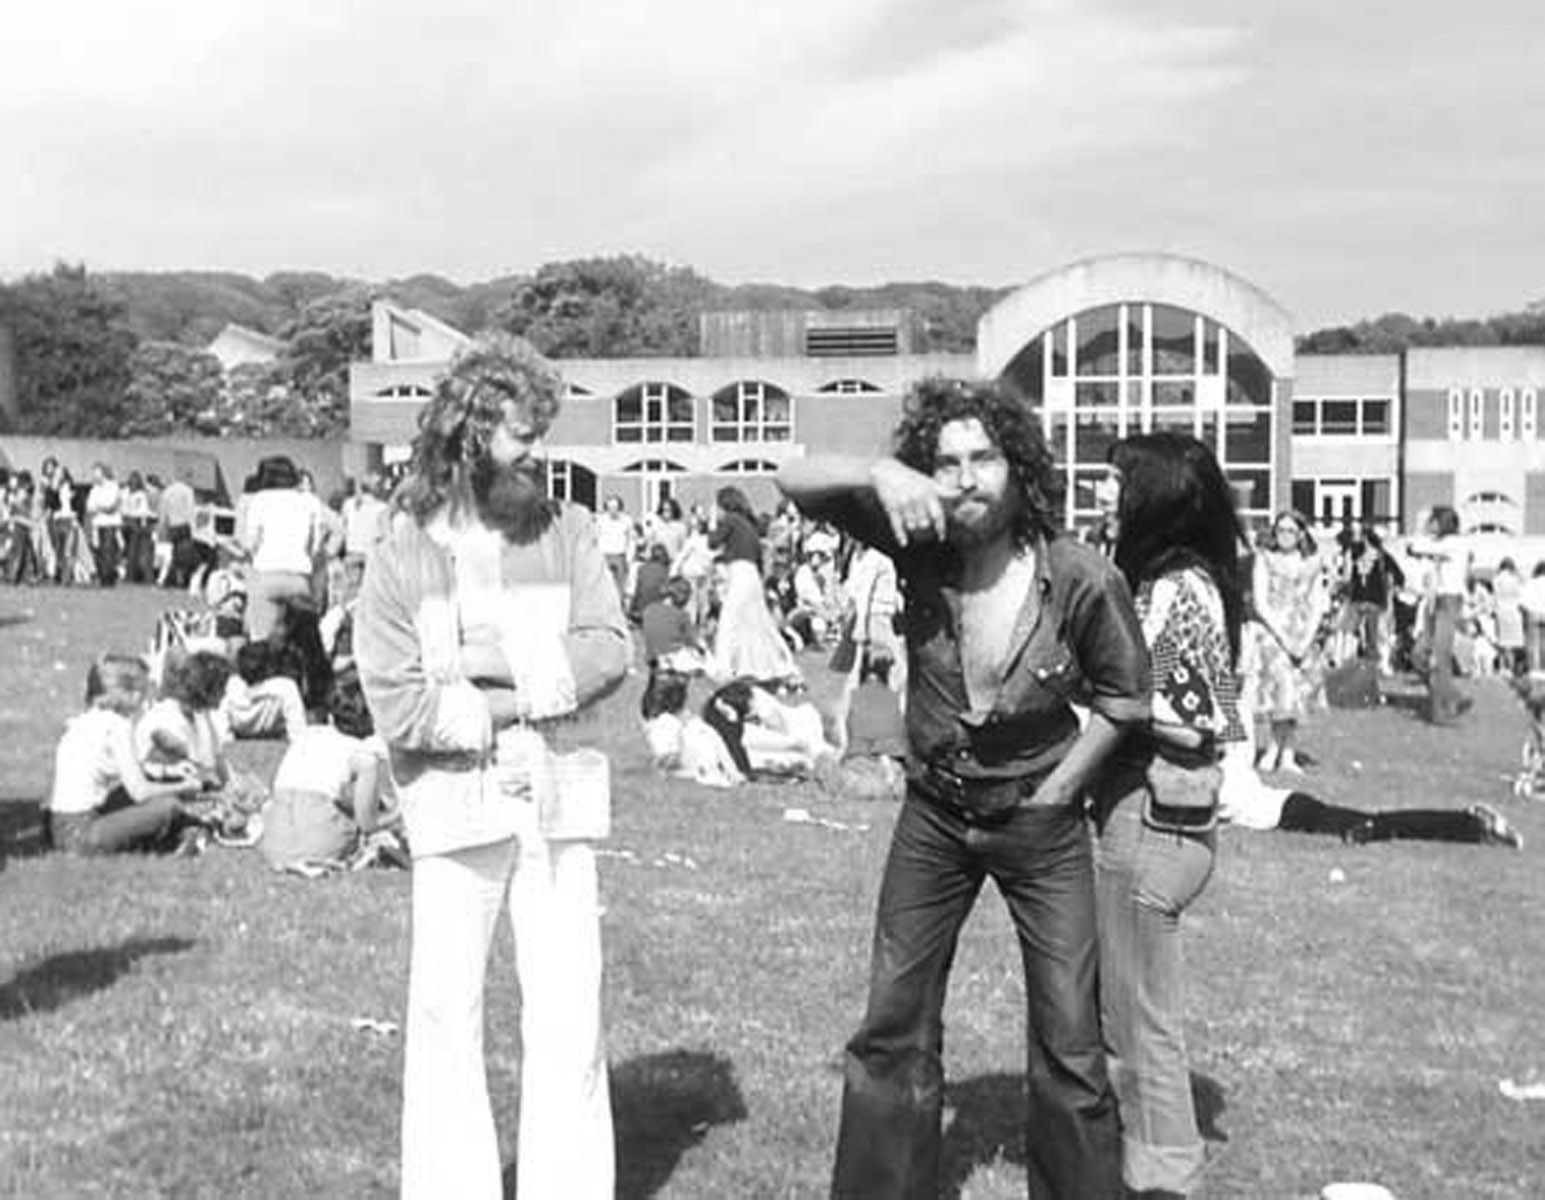 Students on campus in the 70s